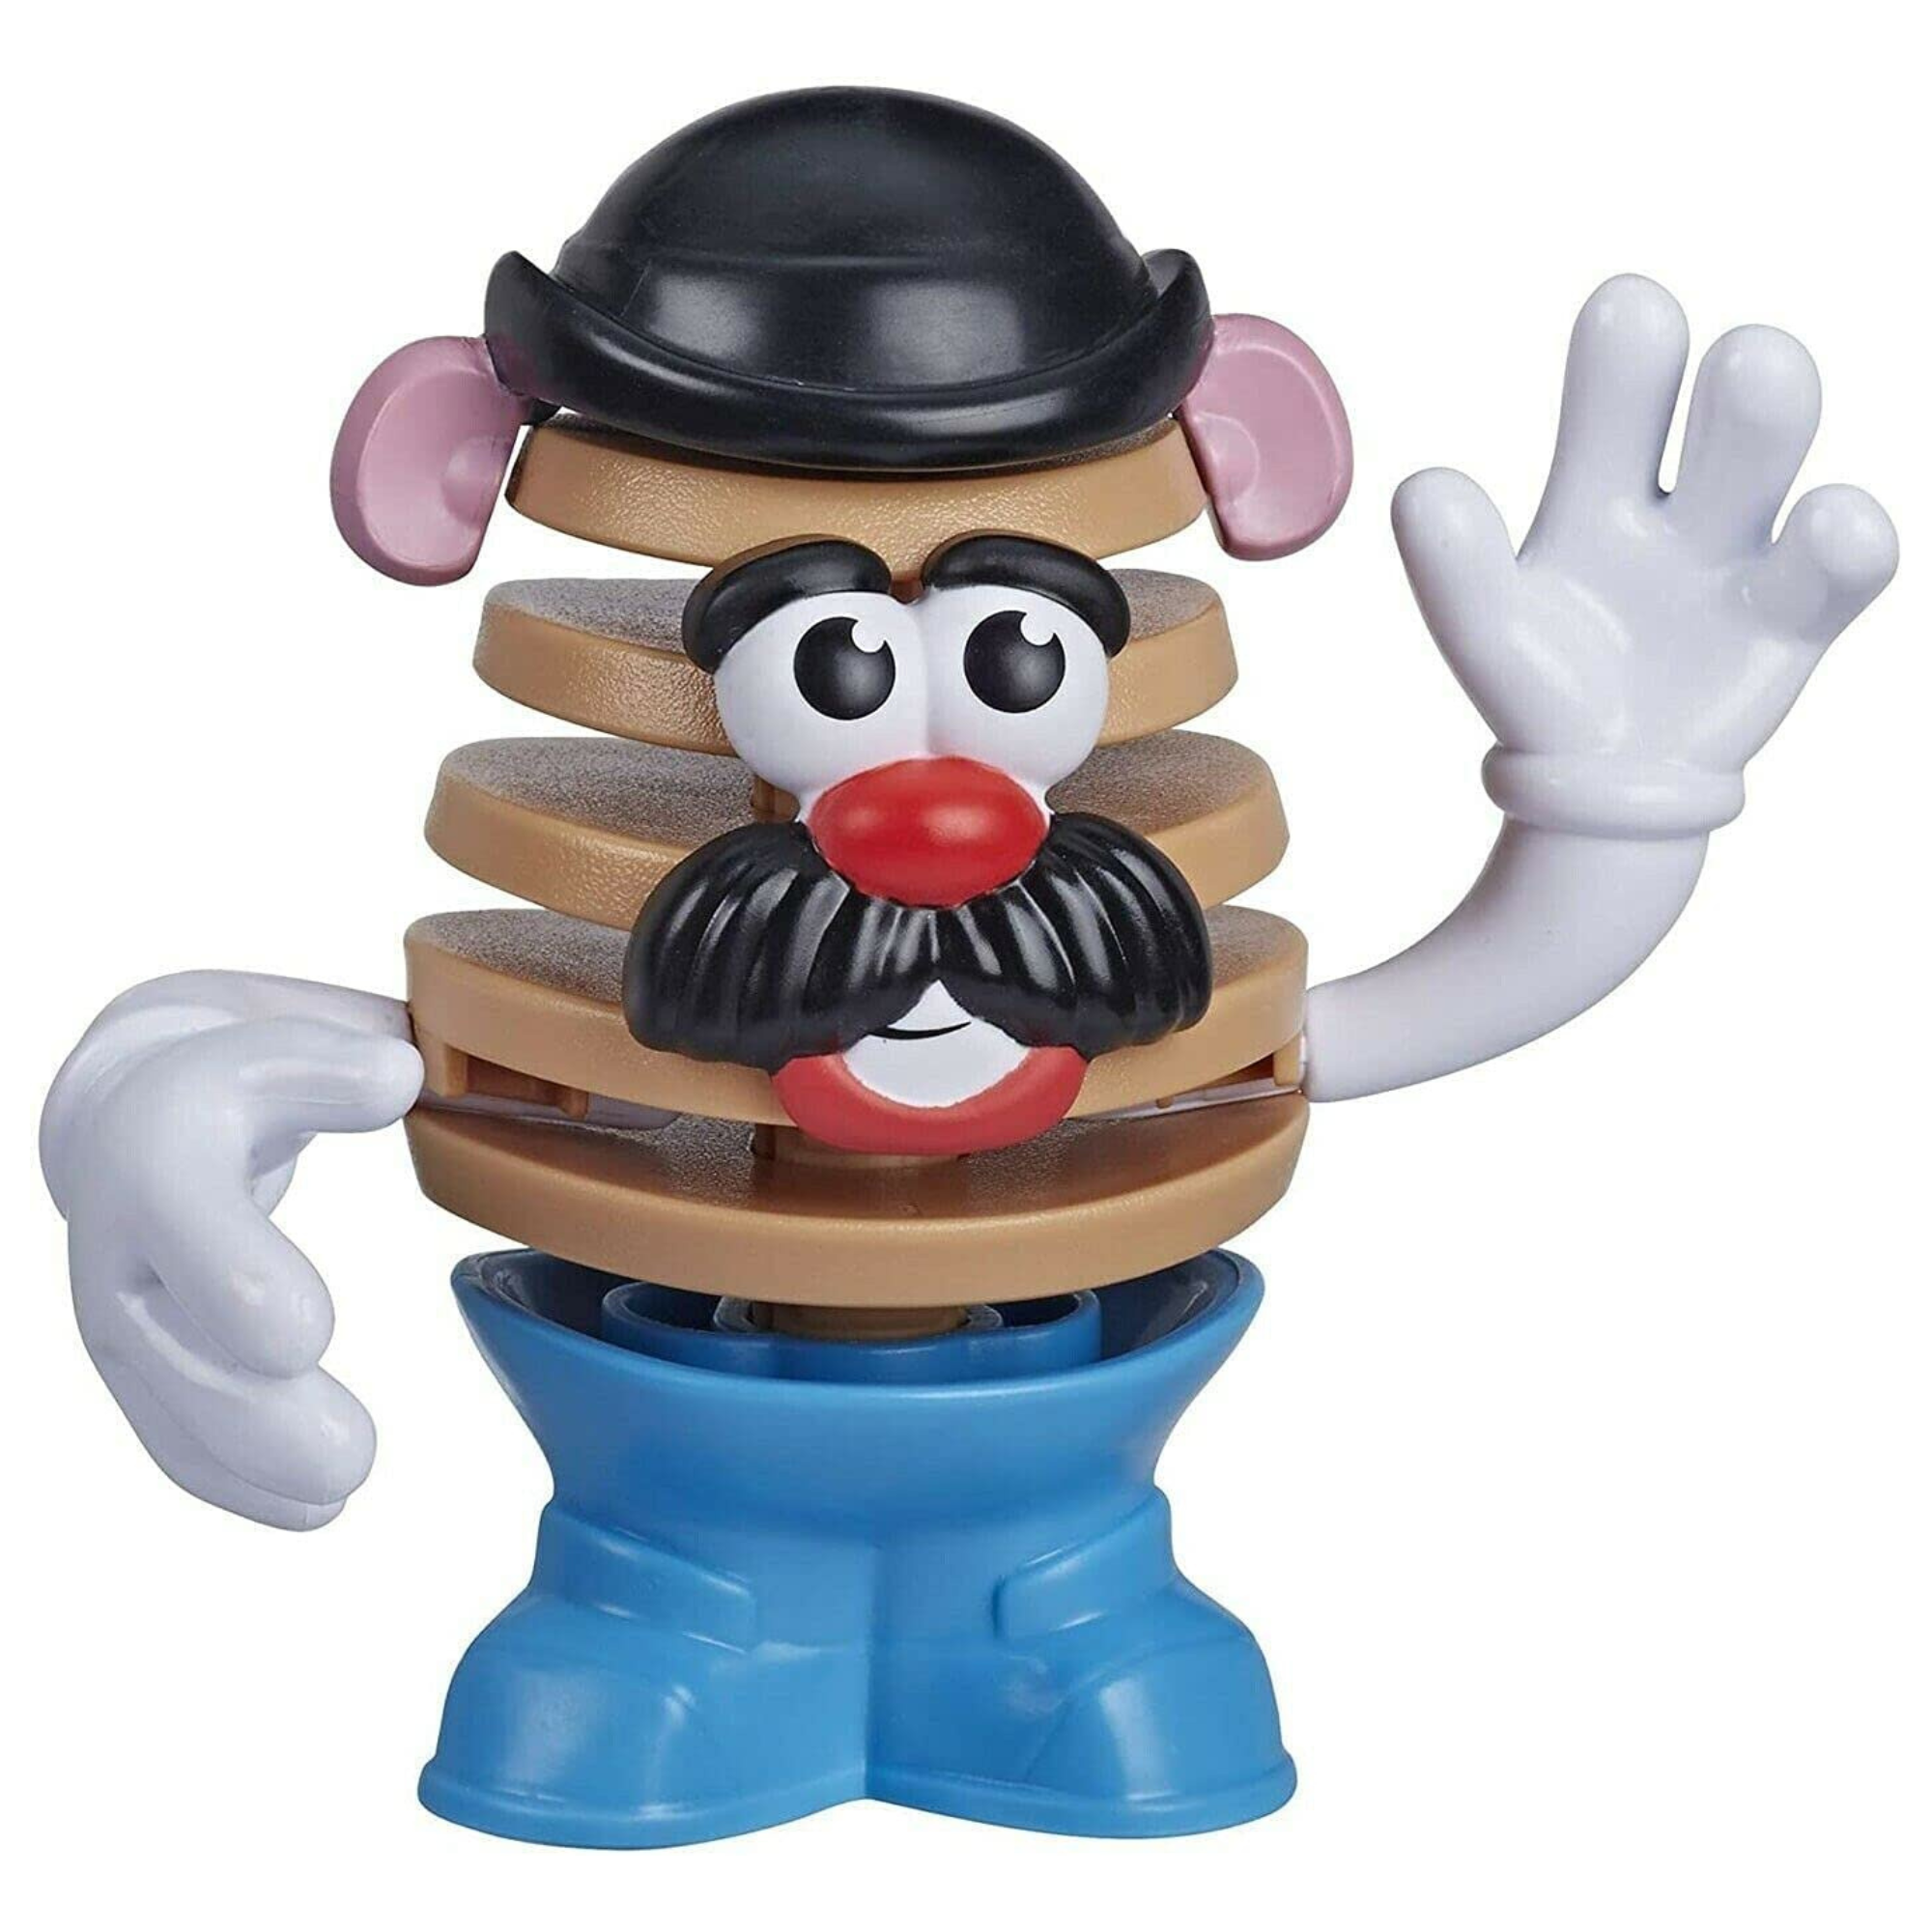 Mr Potato Head Chips Buildable Bag Figures - Original Nature, Barb A Cue, Ranche Blanche, Sault T Chips, Cheesie Onionton - Set of All 5 - Toptoys2u